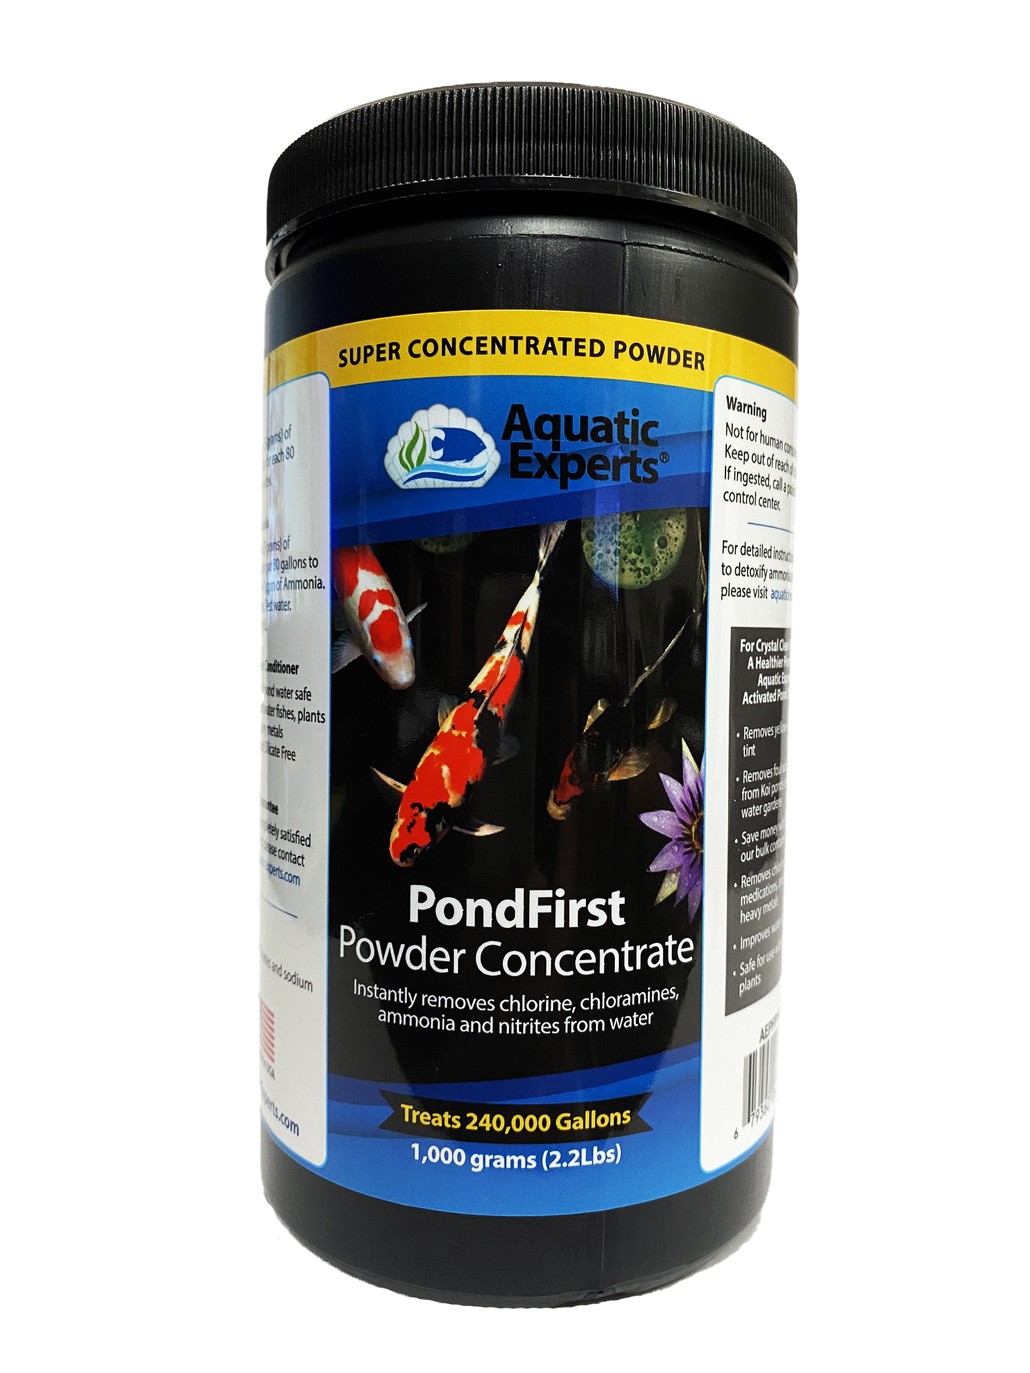 PondFirst - Concentrated Instant Dechlorinator for Fish Ponds, Makes Water Safe for Koi and Goldfish, Made in The USA